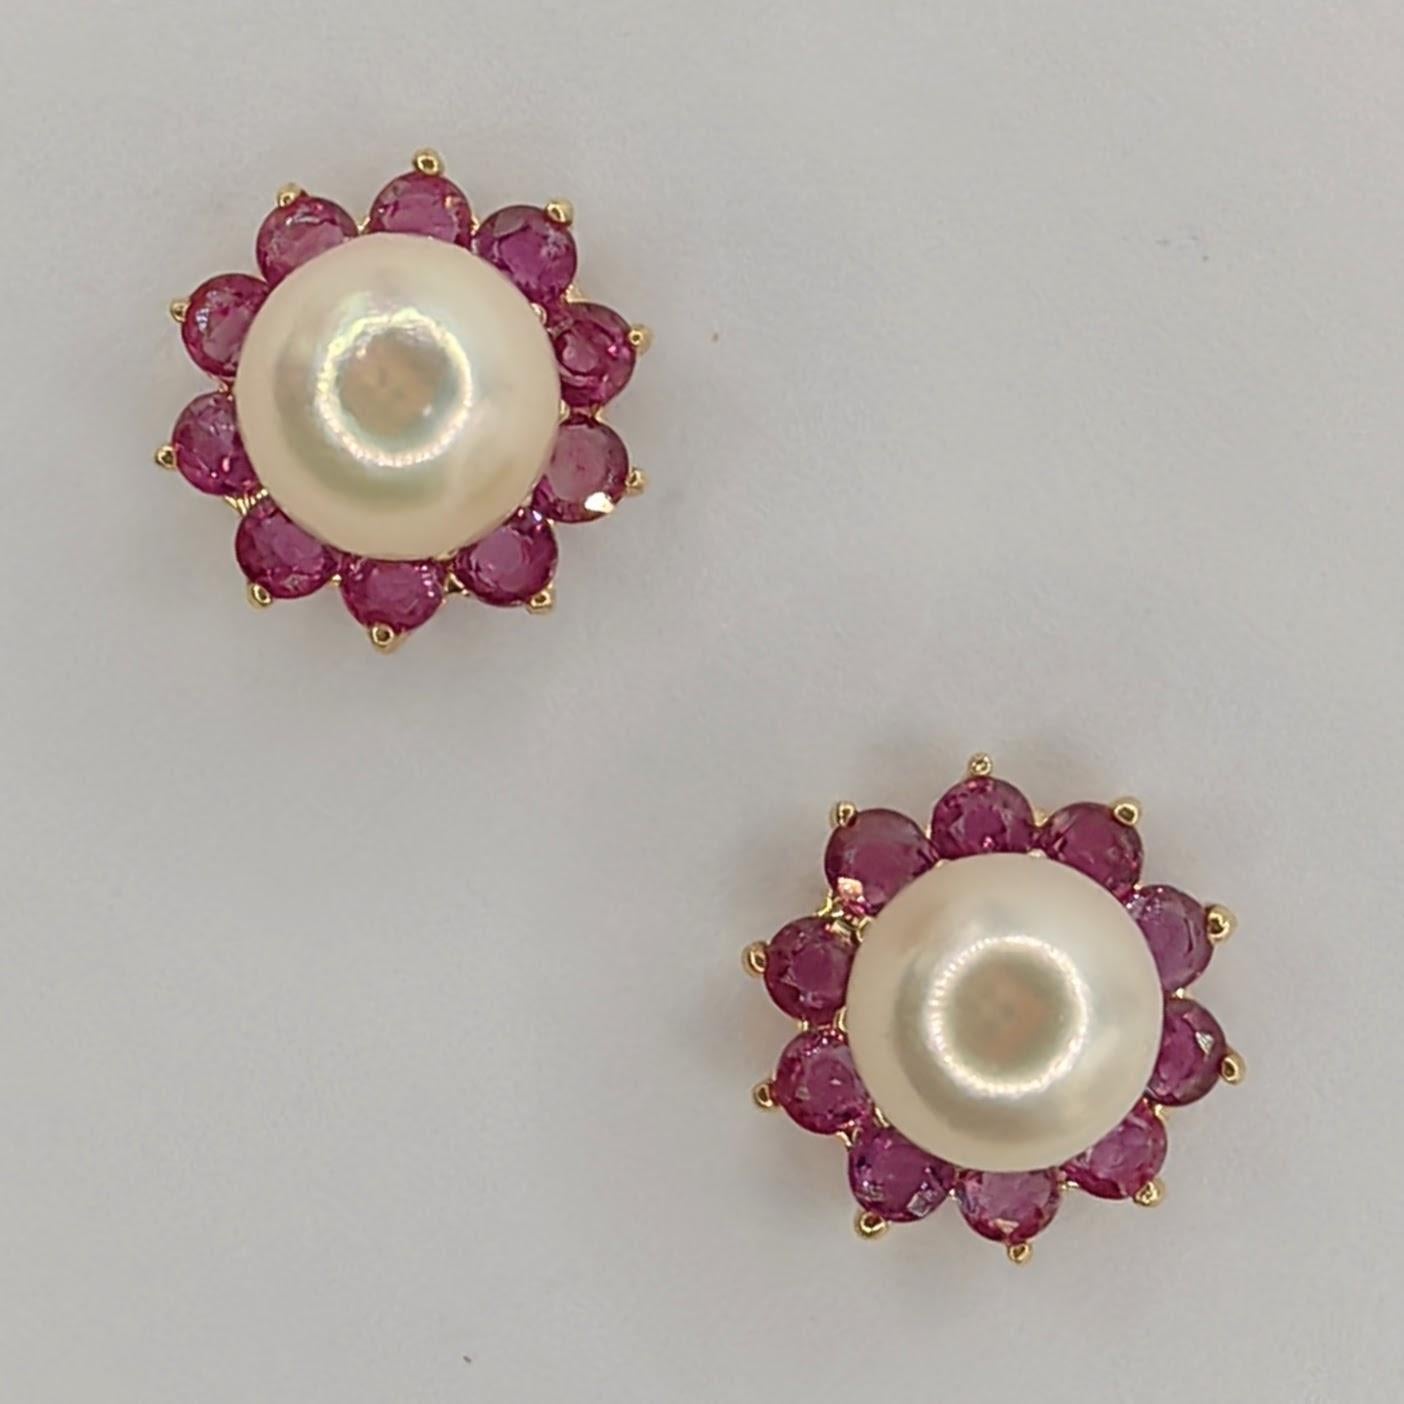 Introducing our Vintage 80's Pearl Stud & Ruby Jacket Earrings in 14K Yellow Gold, a versatile and elegant pair that offers two stunning looks in one. These earrings not only adorn your ears with beautiful pearls but also come with a detachable ruby